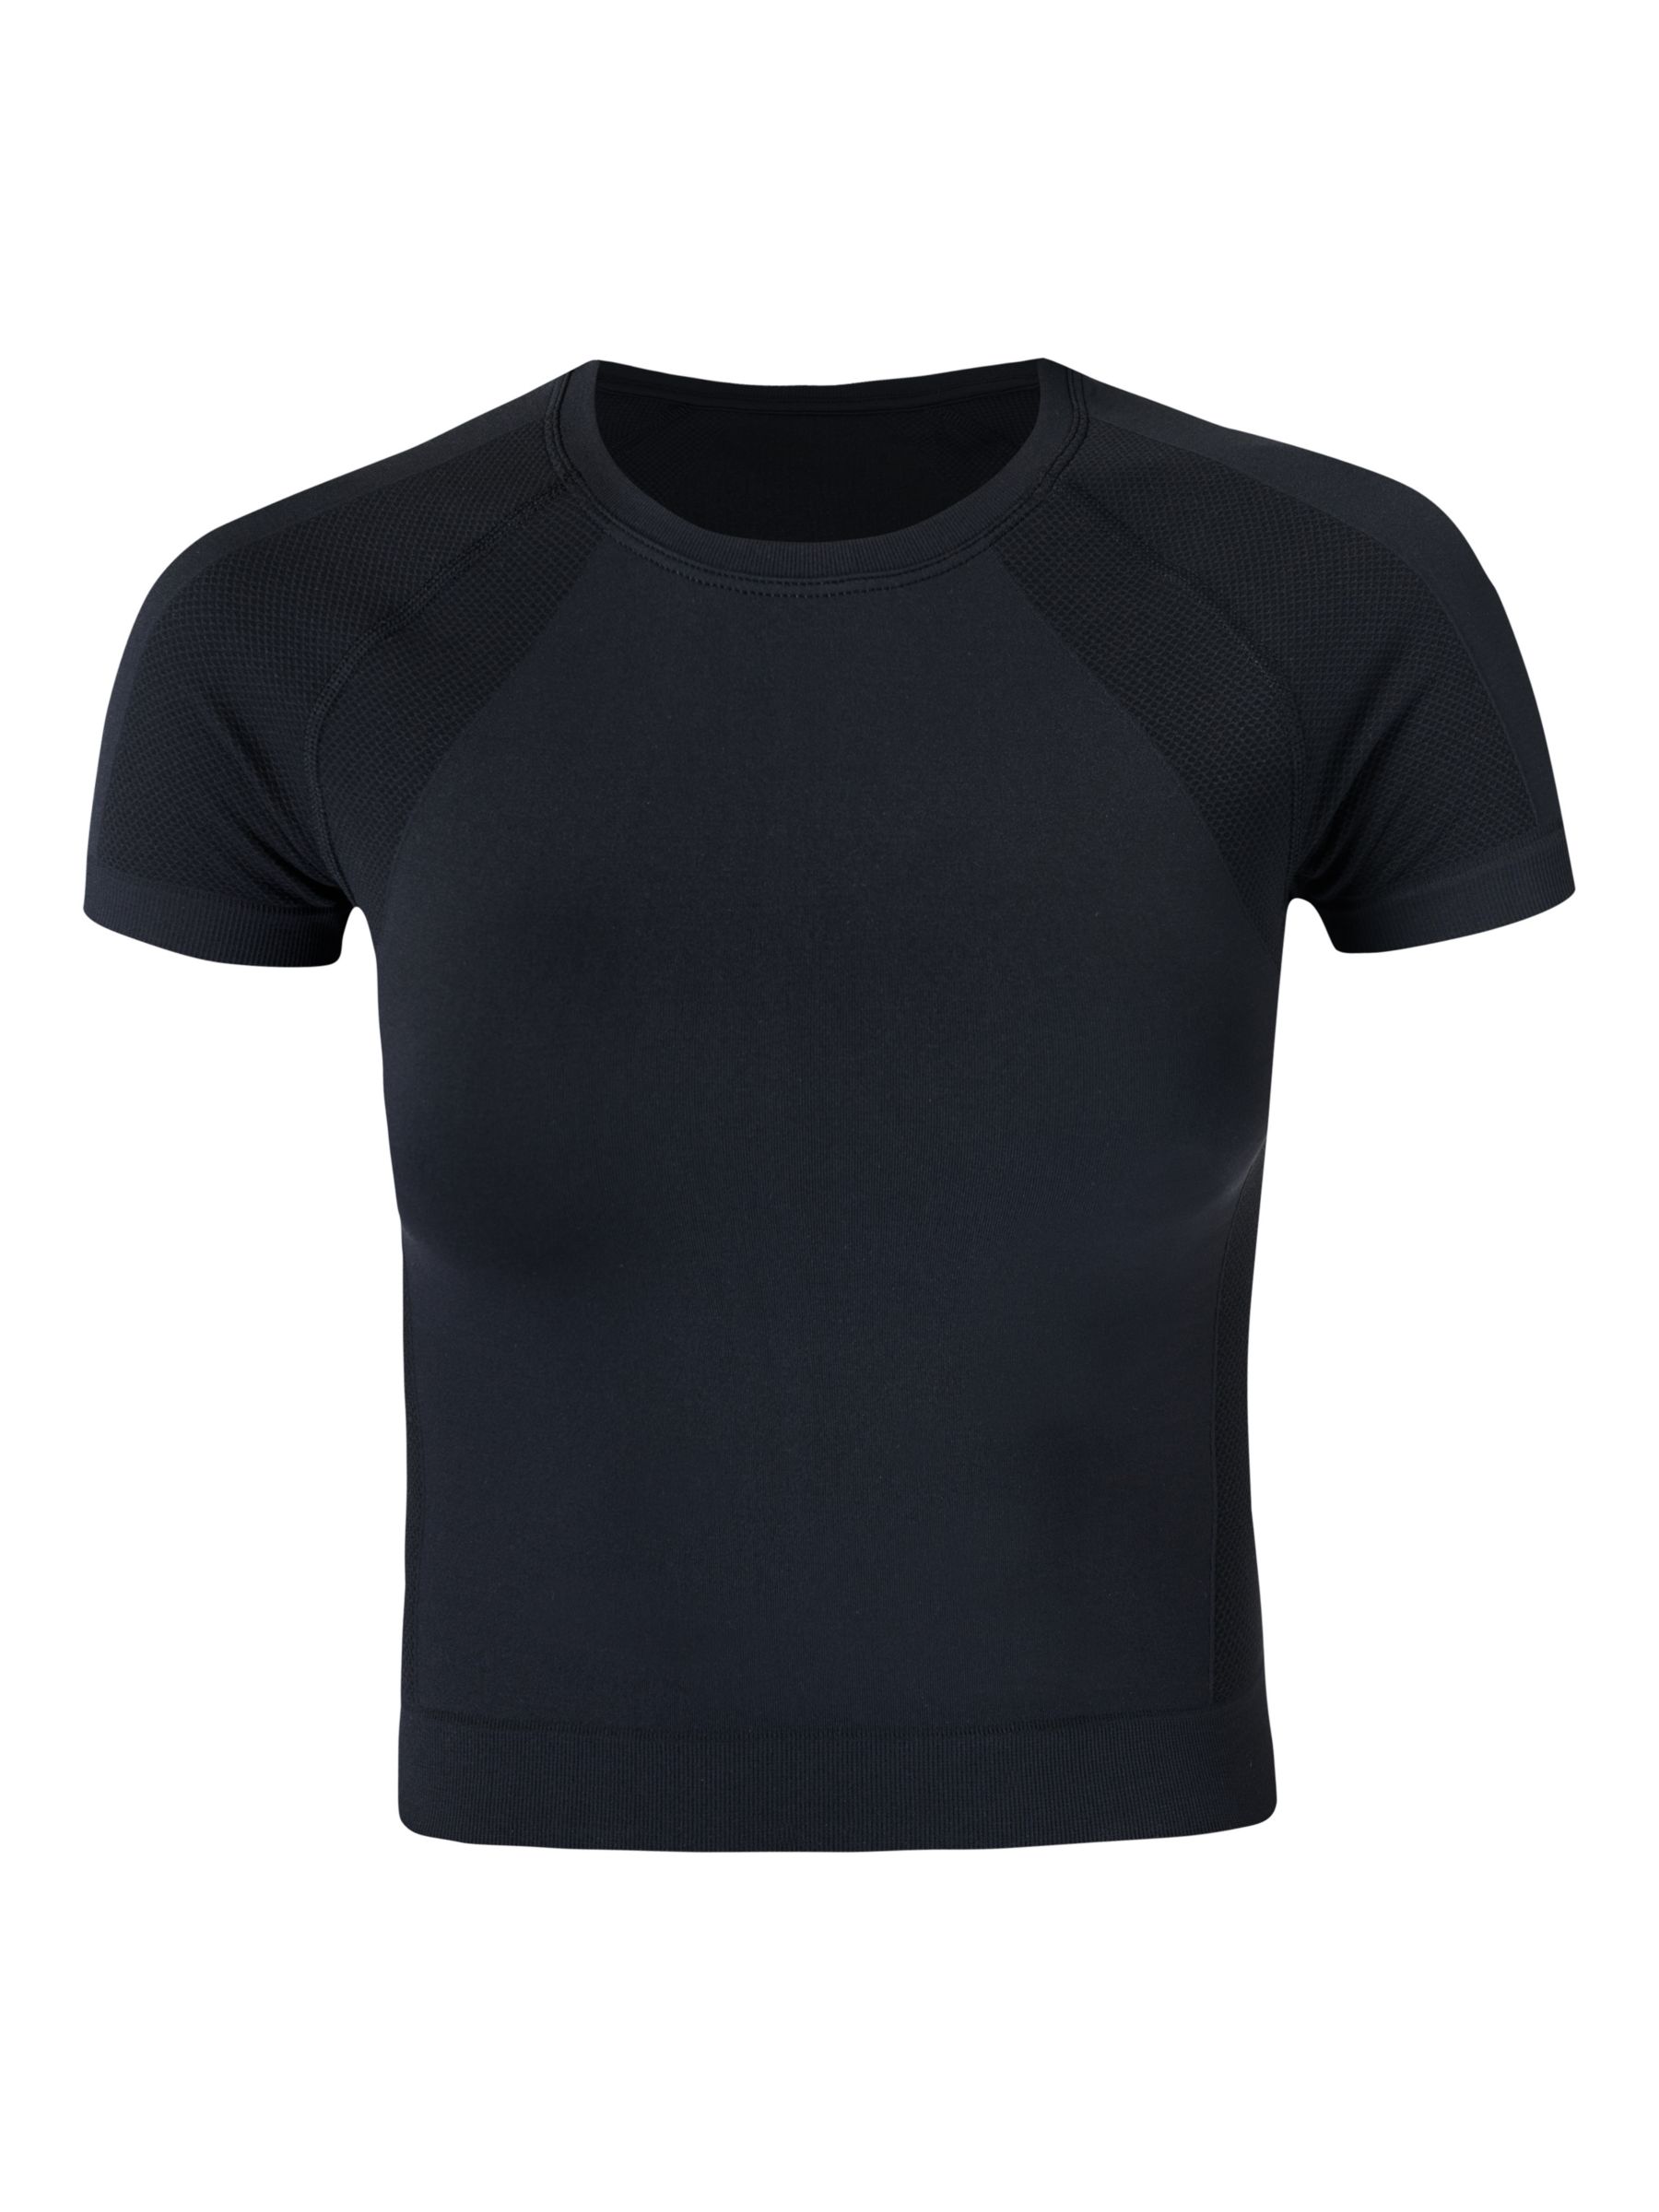 Buy Sweaty Betty Athlete Crop Seamless Workout Top Online at johnlewis.com